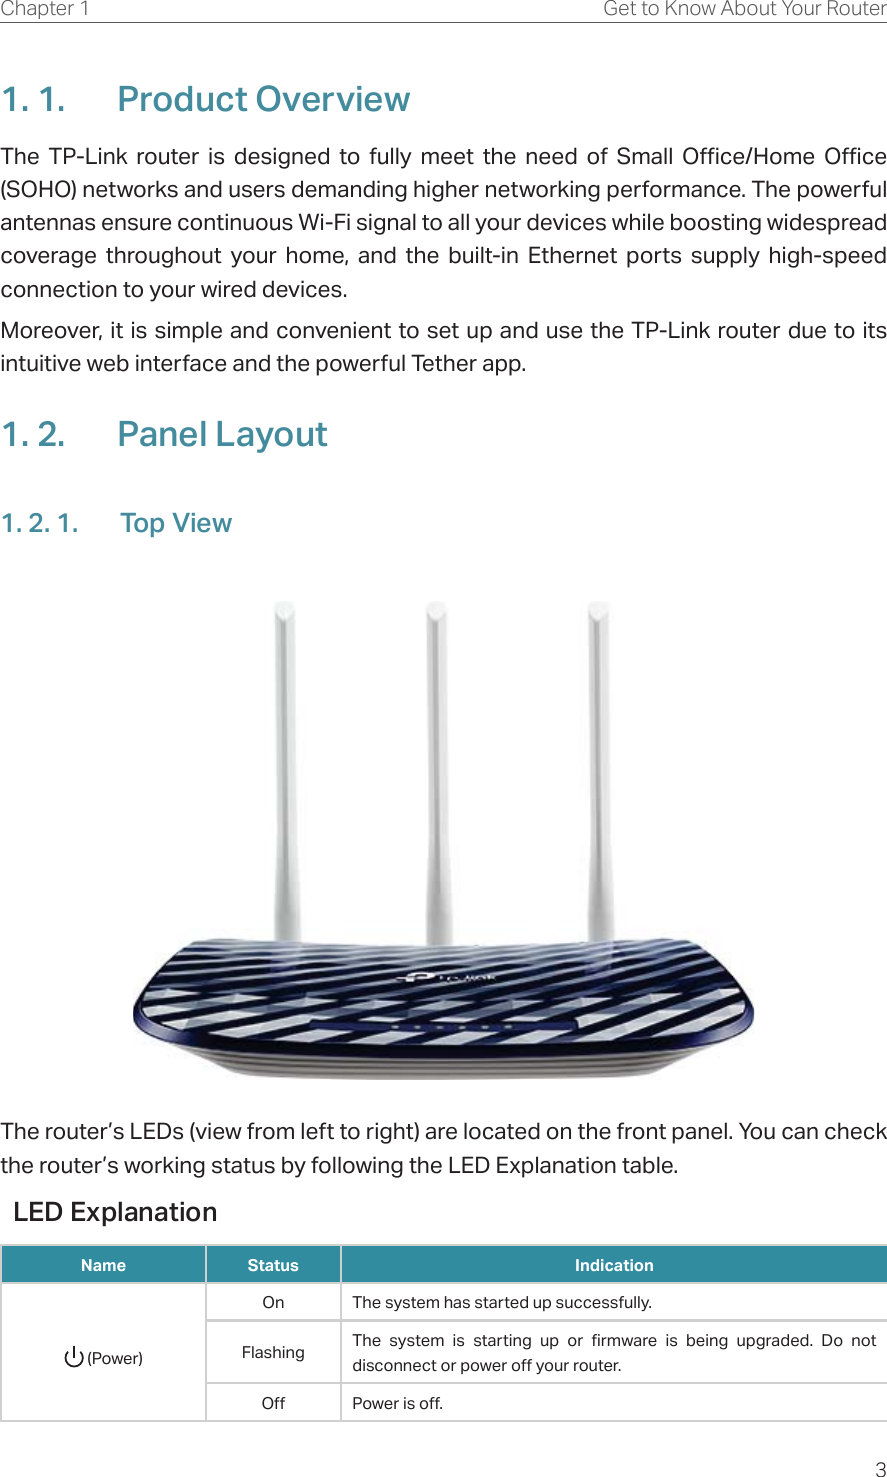 3Chapter 1 Get to Know About Your Router1. 1.  Product OverviewThe TP-Link router is designed to fully meet the need of Small Office/Home Office (SOHO) networks and users demanding higher networking performance. The powerful antennas ensure continuous Wi-Fi signal to all your devices while boosting widespread coverage throughout your home, and the built-in Ethernet ports supply high-speed connection to your wired devices.Moreover, it is simple and convenient to set up and use the TP-Link router due to its intuitive web interface and the powerful Tether app.1. 2.  Panel Layout1. 2. 1.  Top ViewThe router’s LEDs (view from left to right) are located on the front panel. You can check the router’s working status by following the LED Explanation table.LED ExplanationName Status Indication (Power)On The system has started up successfully.Flashing The system is starting up or firmware is being upgraded. Do not disconnect or power off your router.Off Power is off.